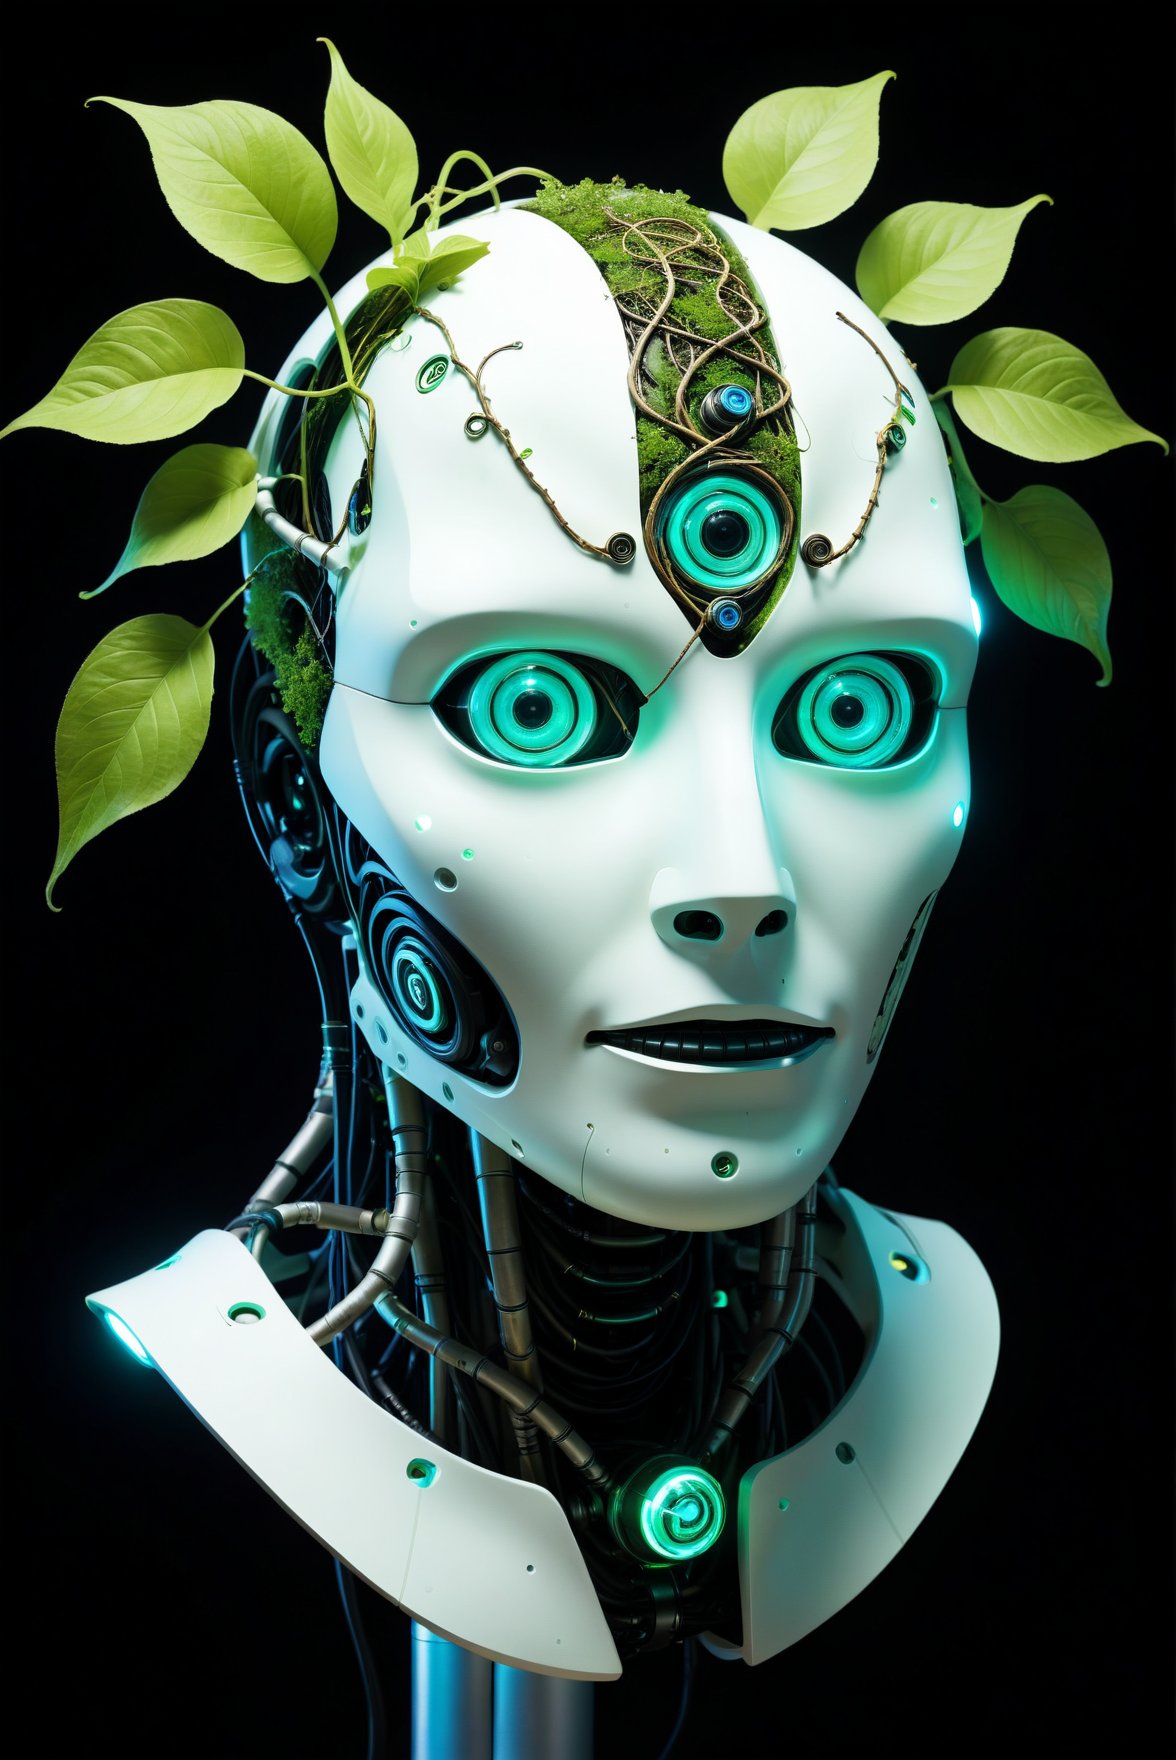 A colossal robot head adorned with ancient scrolls and glyphs. and the robot head is also integrated with a tangle of bioluminescent vines and glowing fungi.  These organic elements appear to power and enhance the robot's functionalities.it  has a tactical mask. The mask is constructed from a dark, matte composite material with a sleek, angular design. ,Glowing green orbs embedded within its face scan and analyze the environment,  preserving information for future generations.